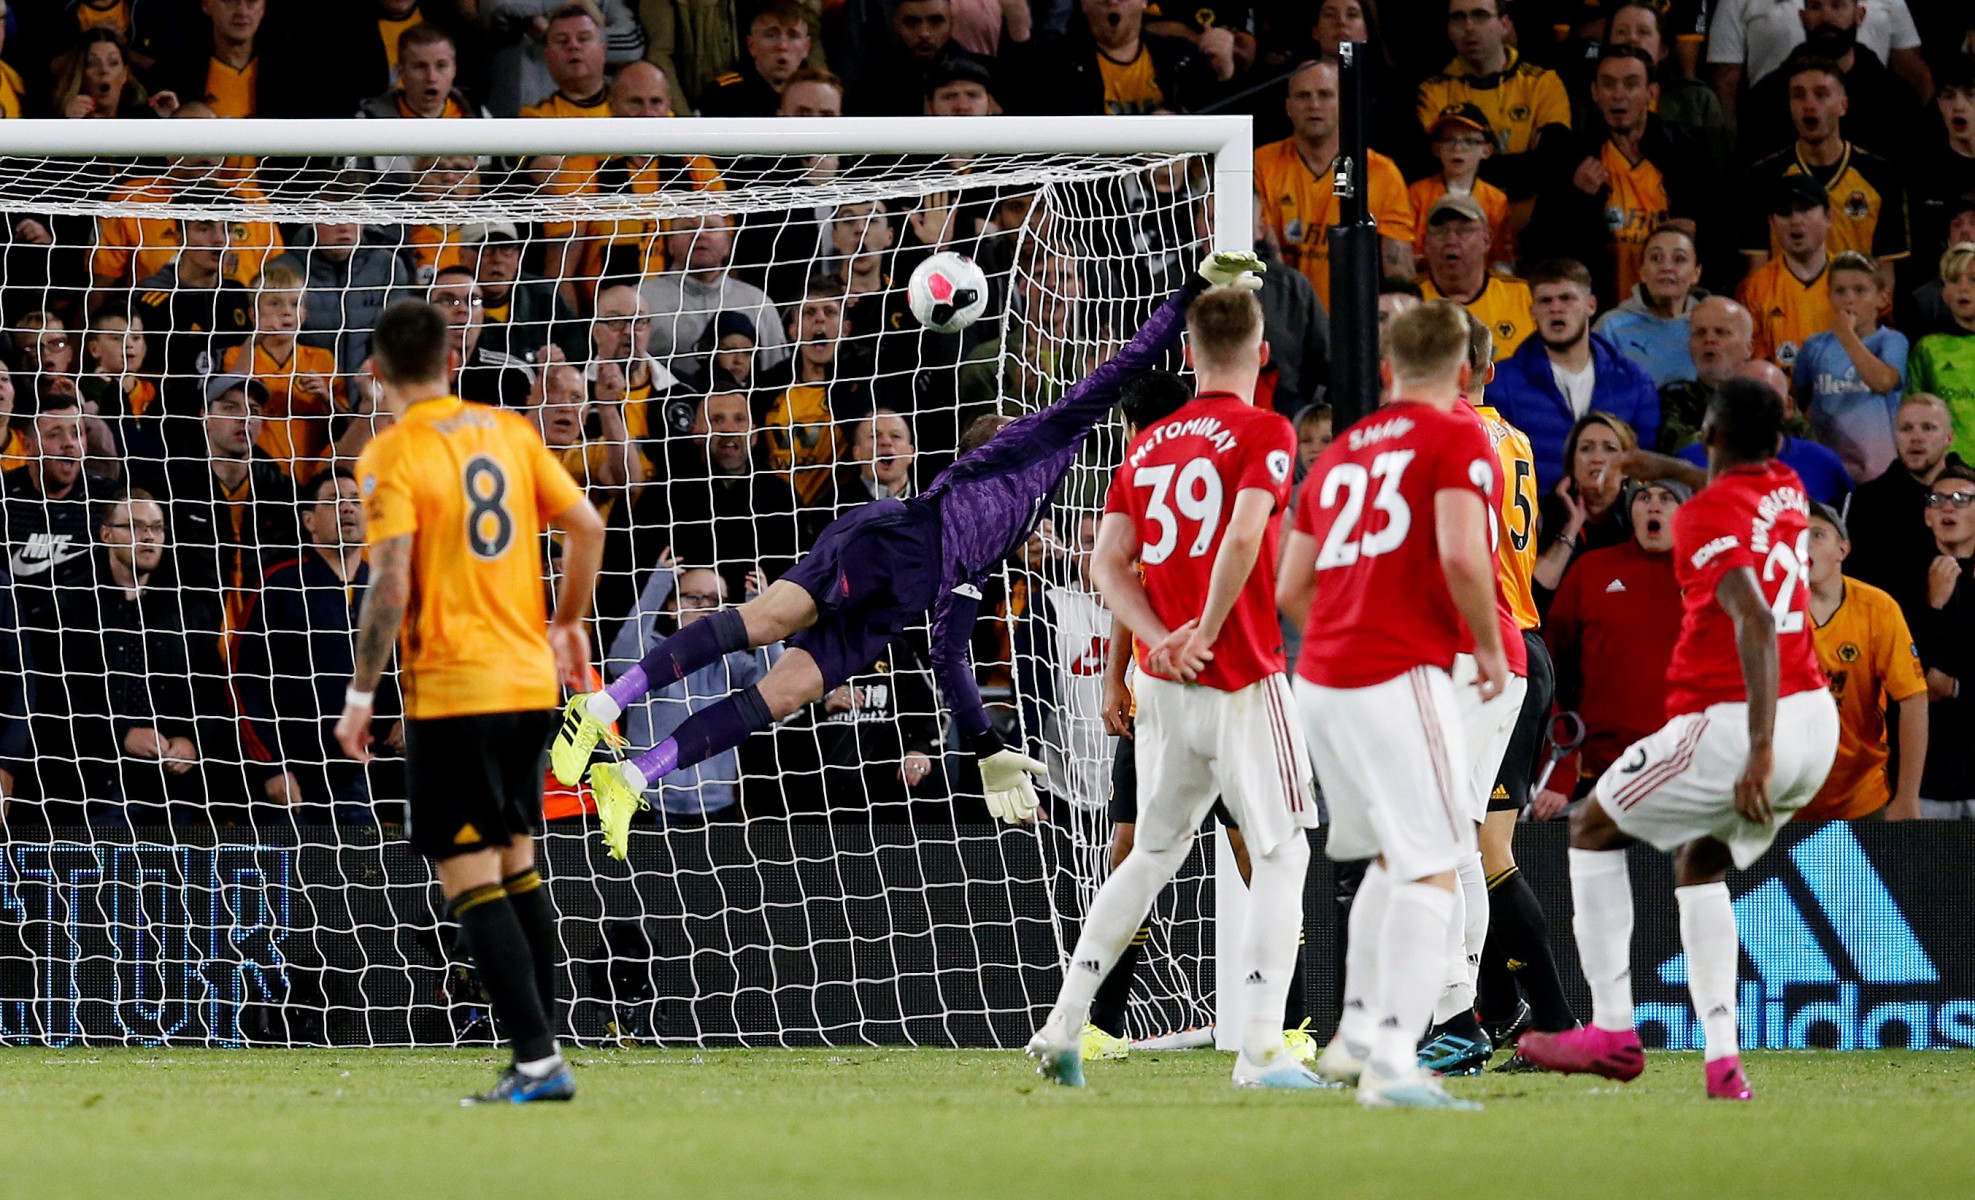 United have squandered leads against Wolves, Southampton and Arsenal already this season